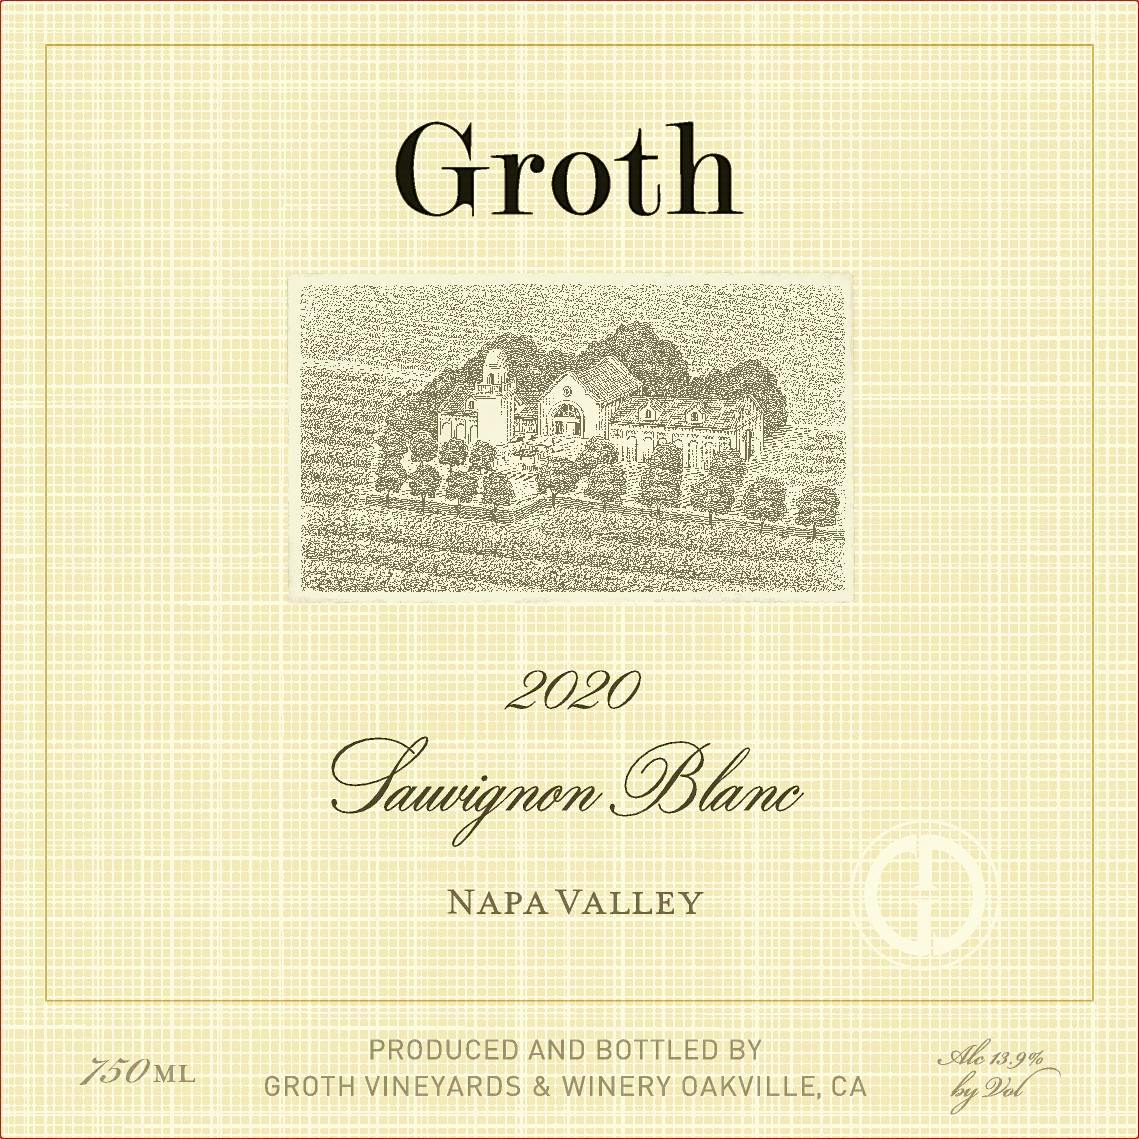 Label for Groth